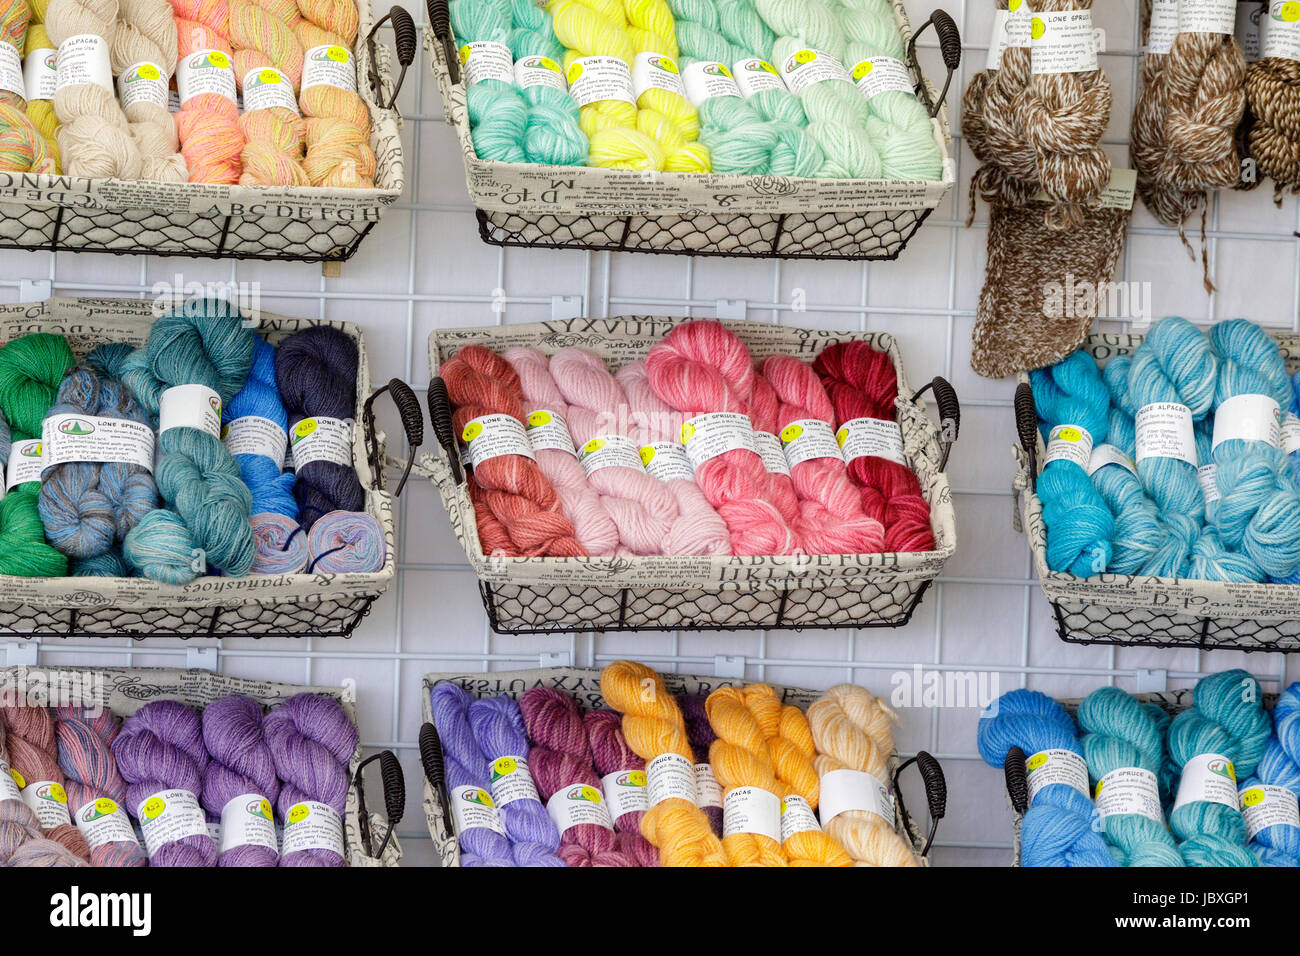 BOUCKVILLE, NY, USA - JUNE 10 2017: Alpaca wool skeins for sale at the annual Fiber Festival of Central New York. Stock Photo